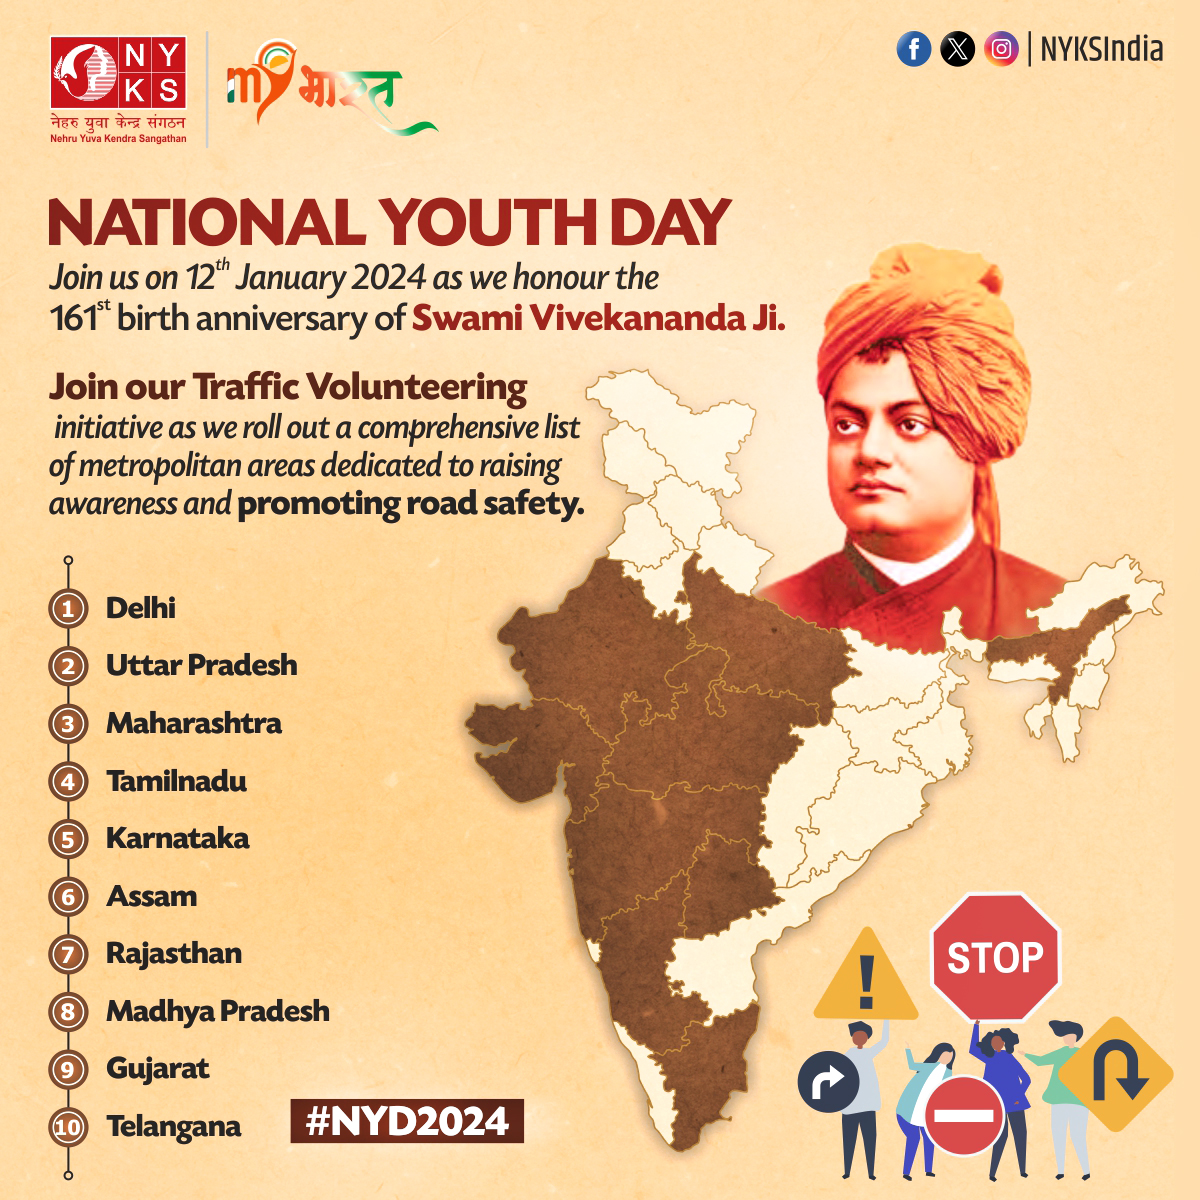 Marking #NationalYouthDay with purpose! 🚦🌟 Join us in our Traffic Volunteering initiative across metropolitan areas, amplifying awareness and championing road safety. Together, let's drive the change we wish to see! 🌐🚗 #NYD2024 #MYBharat #RoadSafetyWeek2024 #NYKS